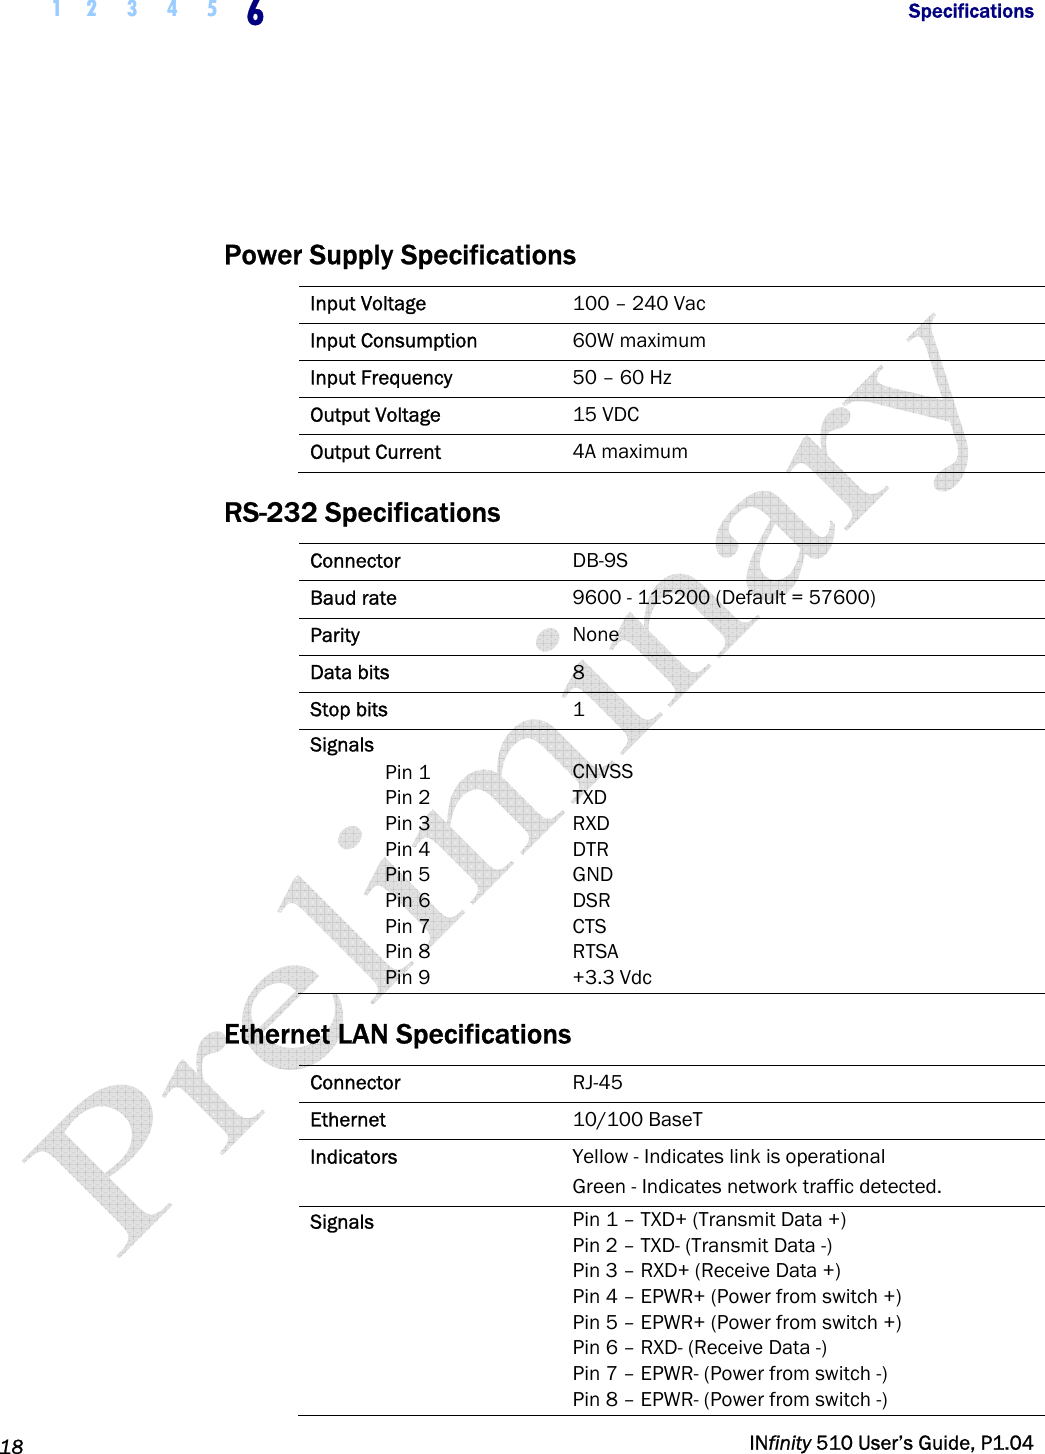  1 2  3  4  5  6            Specifications   18   INfinity 510 User’s Guide, P1.04    Power Supply Specifications Input Voltage  100 – 240 Vac Input Consumption  60W maximum Input Frequency  50 – 60 Hz Output Voltage  15 VDC Output Current  4A maximum RS-232 Specifications Connector  DB-9S Baud rate  9600 - 115200 (Default = 57600) Parity  None Data bits  8 Stop bits  1 Signals  Pin 1  Pin 2  Pin 3  Pin 4  Pin 5  Pin 6  Pin 7  Pin 8  Pin 9  CNVSS TXD RXD DTR GND DSR CTS RTSA +3.3 Vdc Ethernet LAN Specifications Connector  RJ-45 Ethernet  10/100 BaseT Indicators  Yellow - Indicates link is operational Green - Indicates network traffic detected. Signals  Pin 1 – TXD+ (Transmit Data +) Pin 2 – TXD- (Transmit Data -) Pin 3 – RXD+ (Receive Data +) Pin 4 – EPWR+ (Power from switch +) Pin 5 – EPWR+ (Power from switch +) Pin 6 – RXD- (Receive Data -) Pin 7 – EPWR- (Power from switch -) Pin 8 – EPWR- (Power from switch -) 